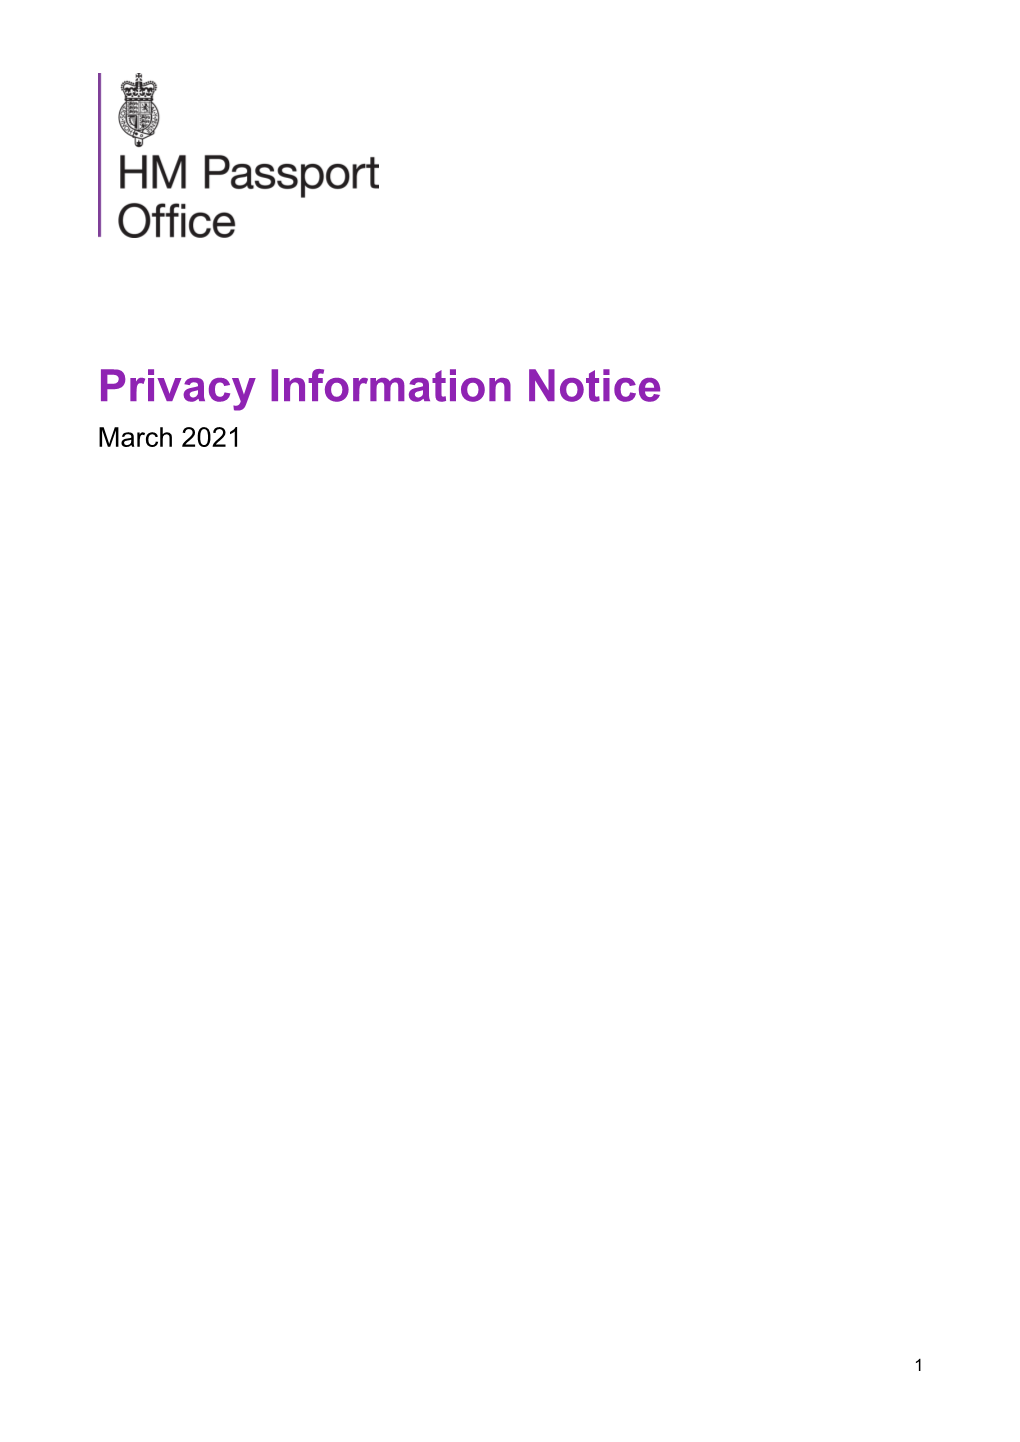 Privacy Information Notice March 2021